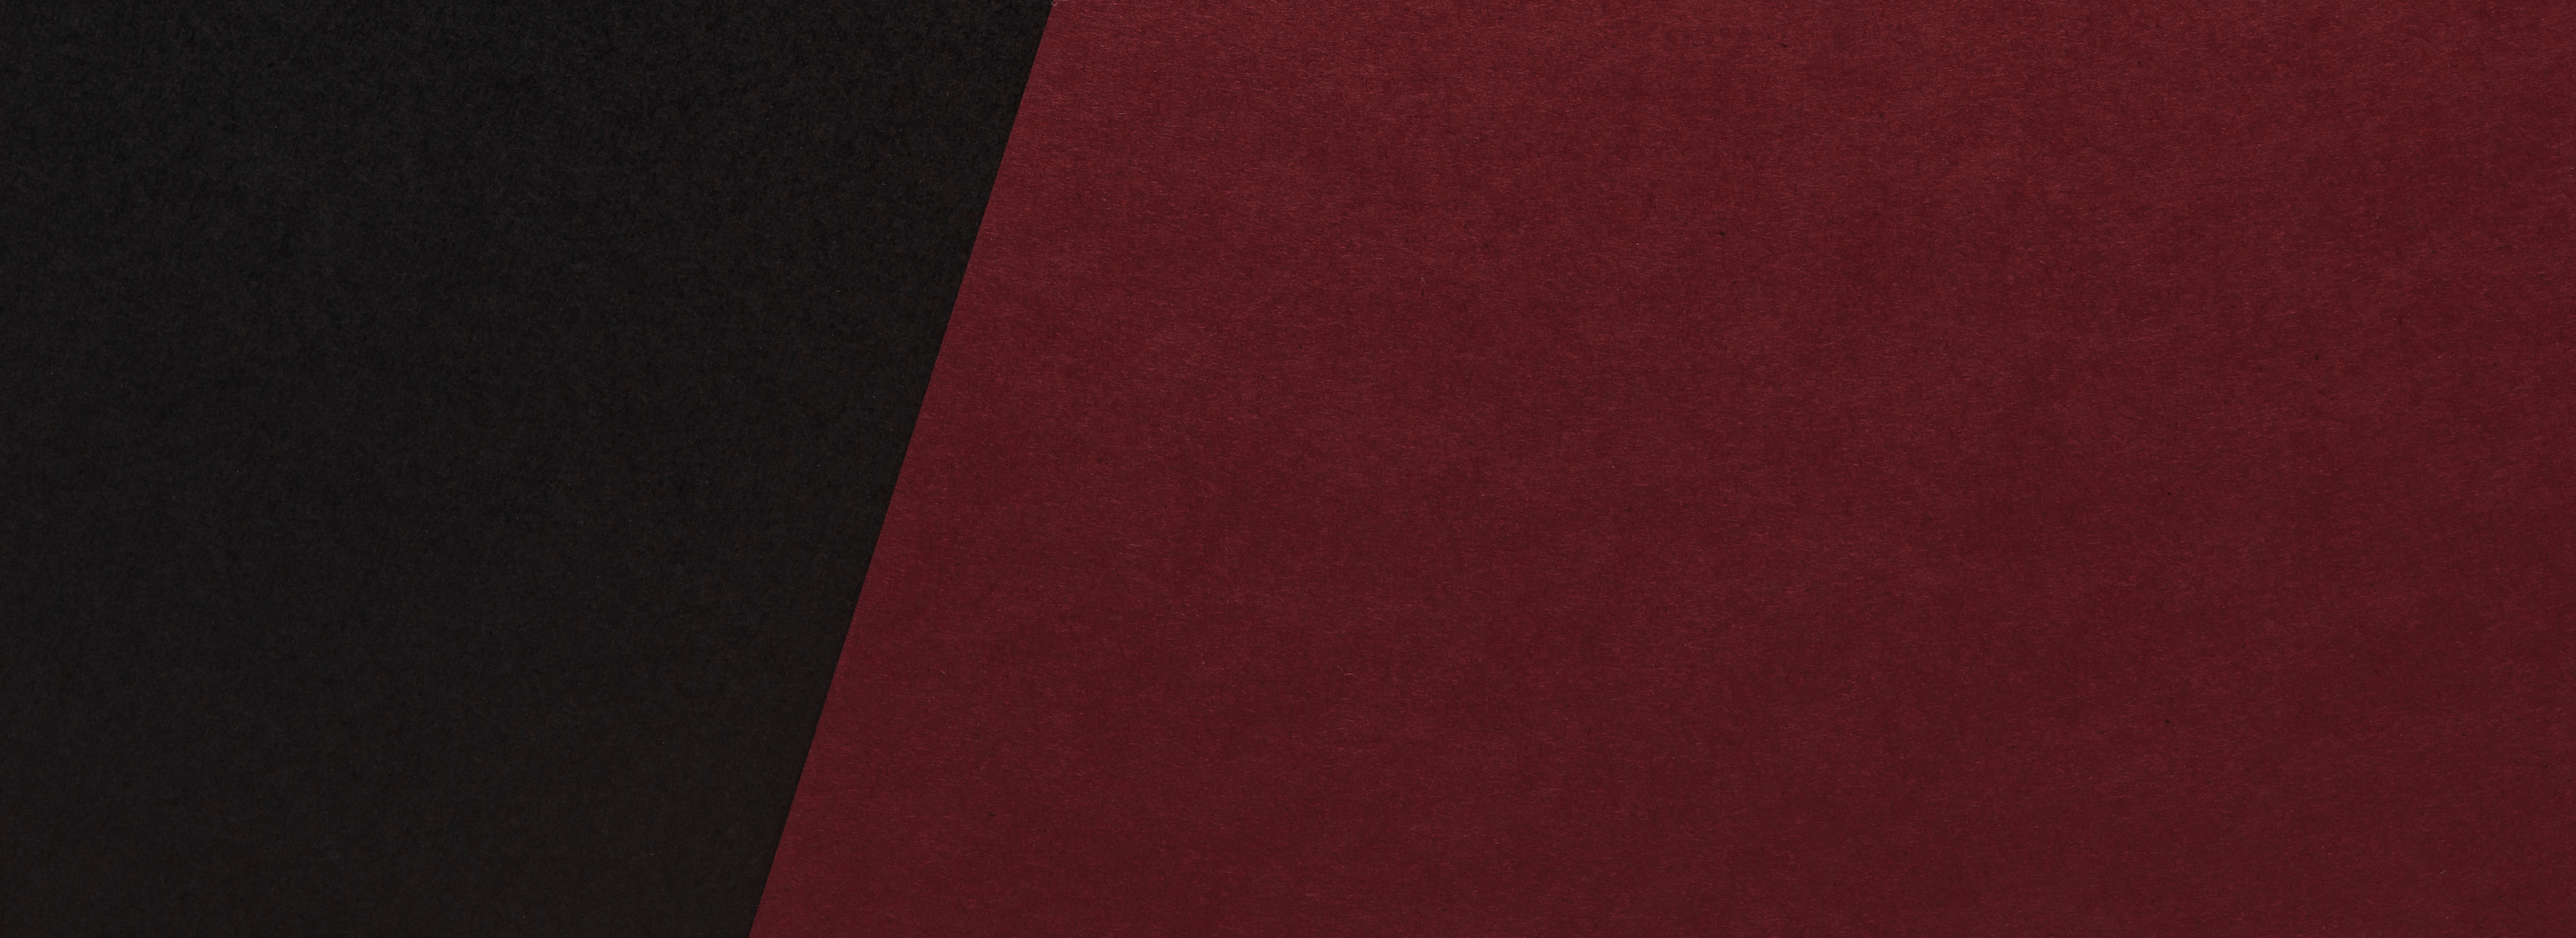 Two color paper blank background in black and red. Paper tex